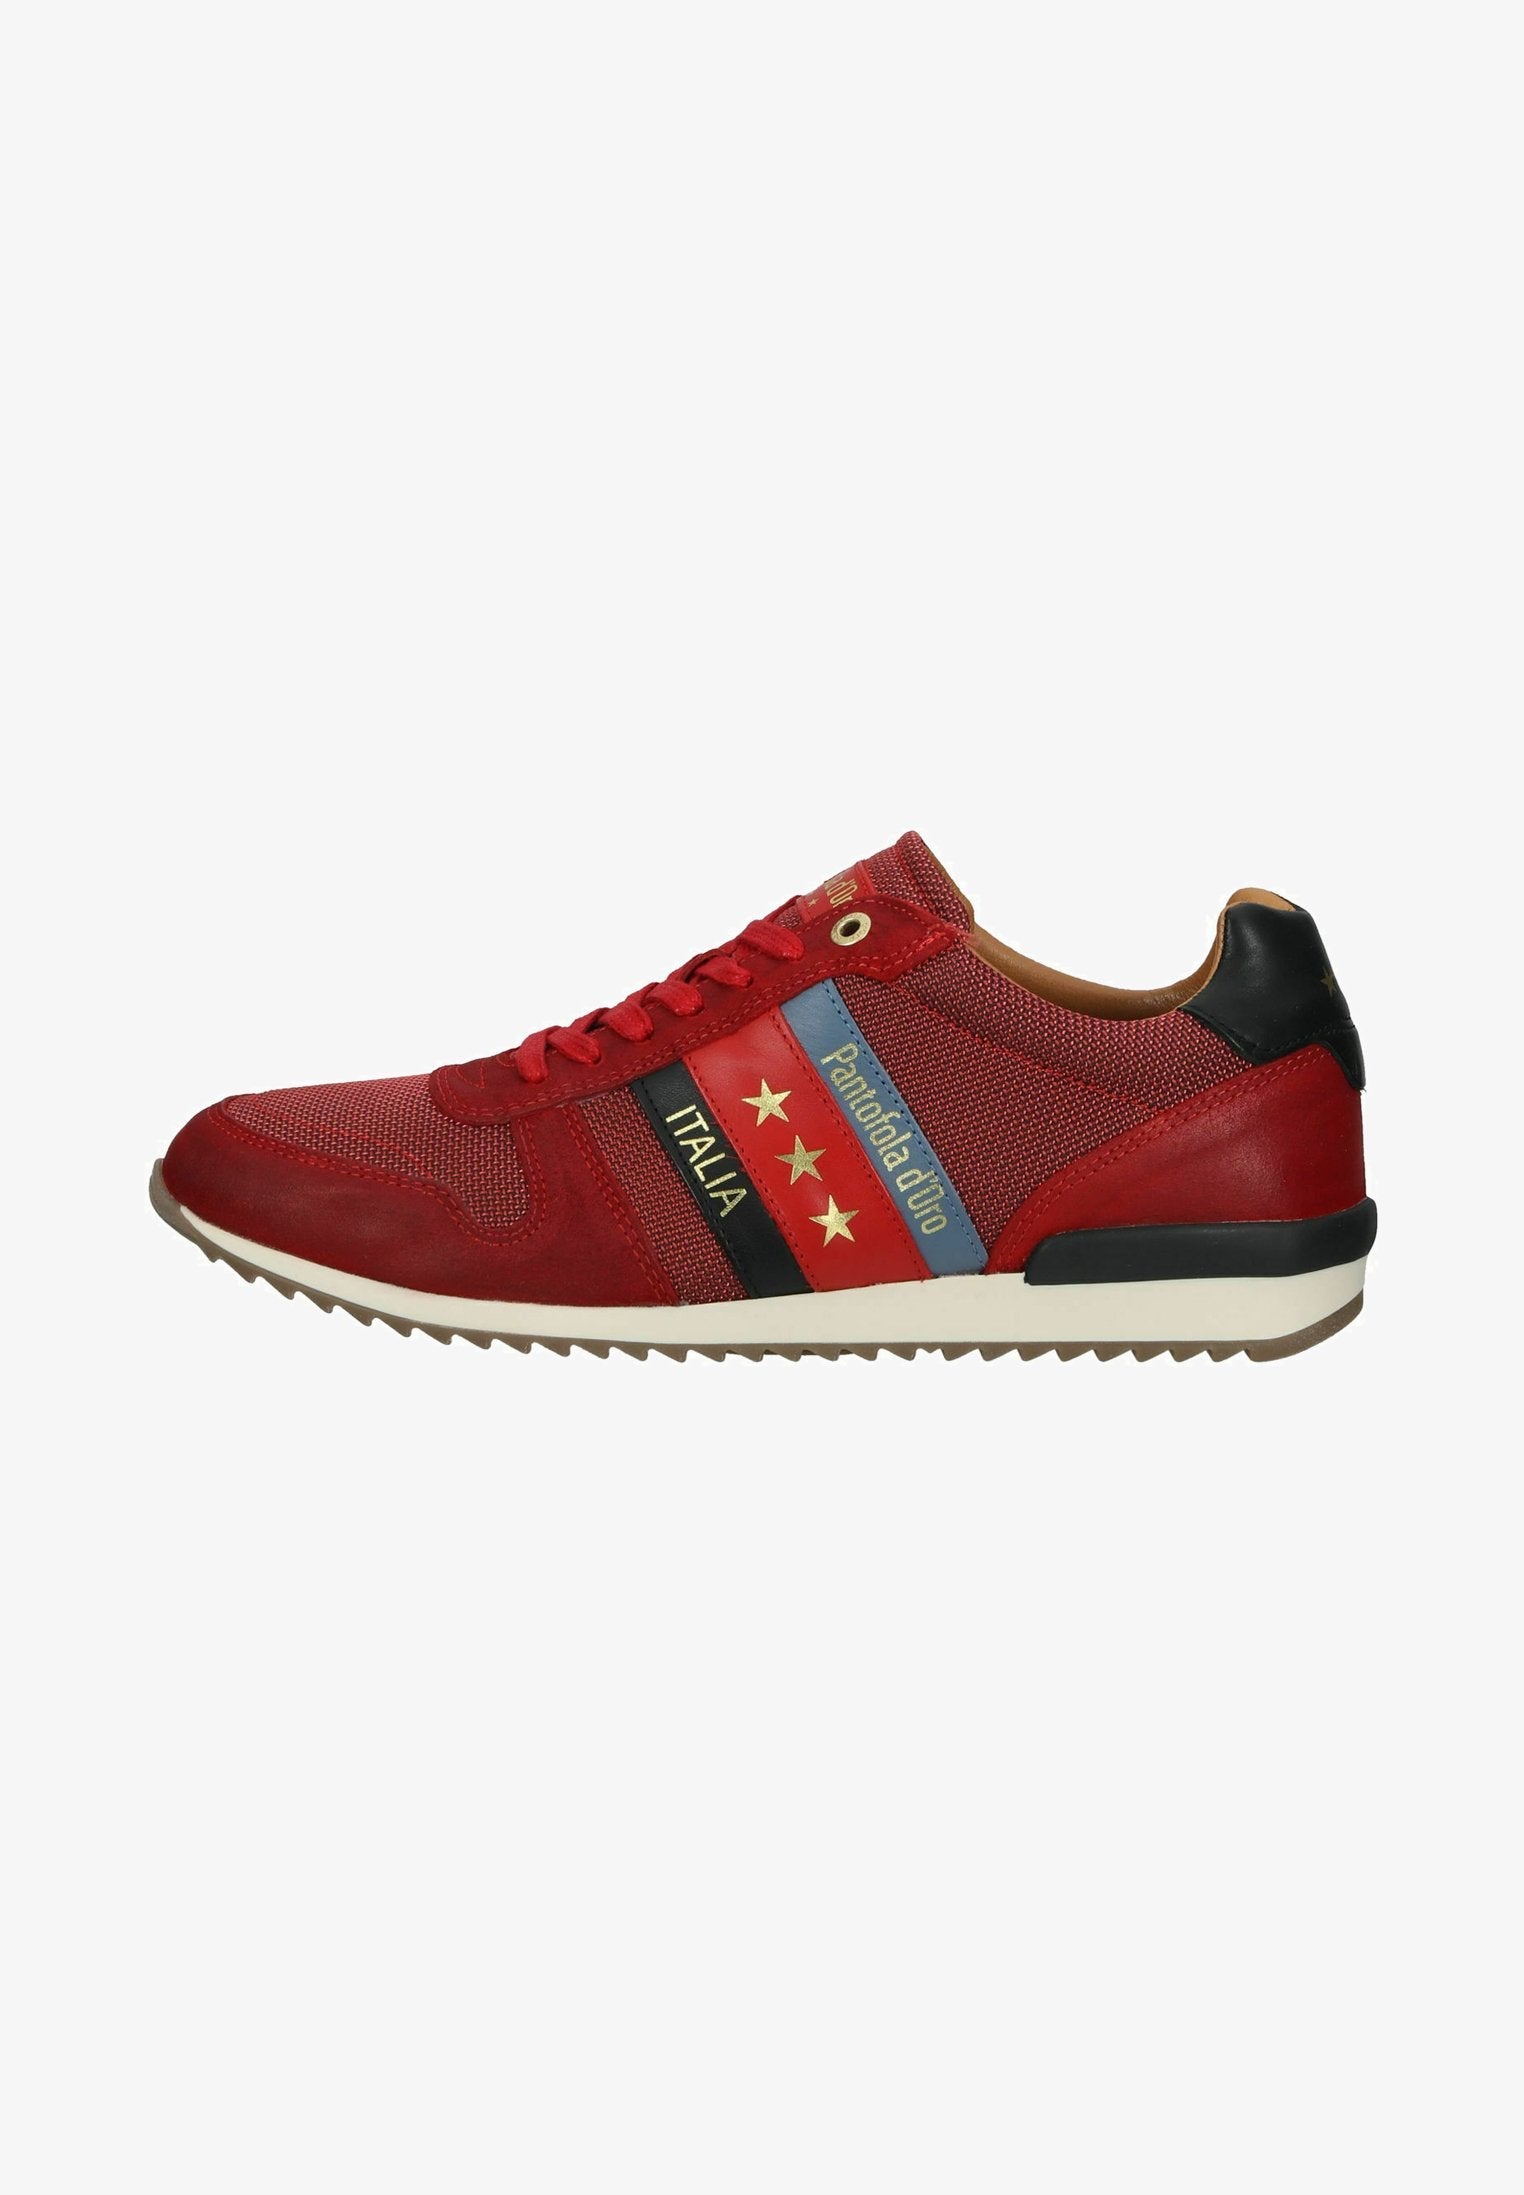 Rizza N Low in Racing Red Sneakers Pantofola d'Oro   